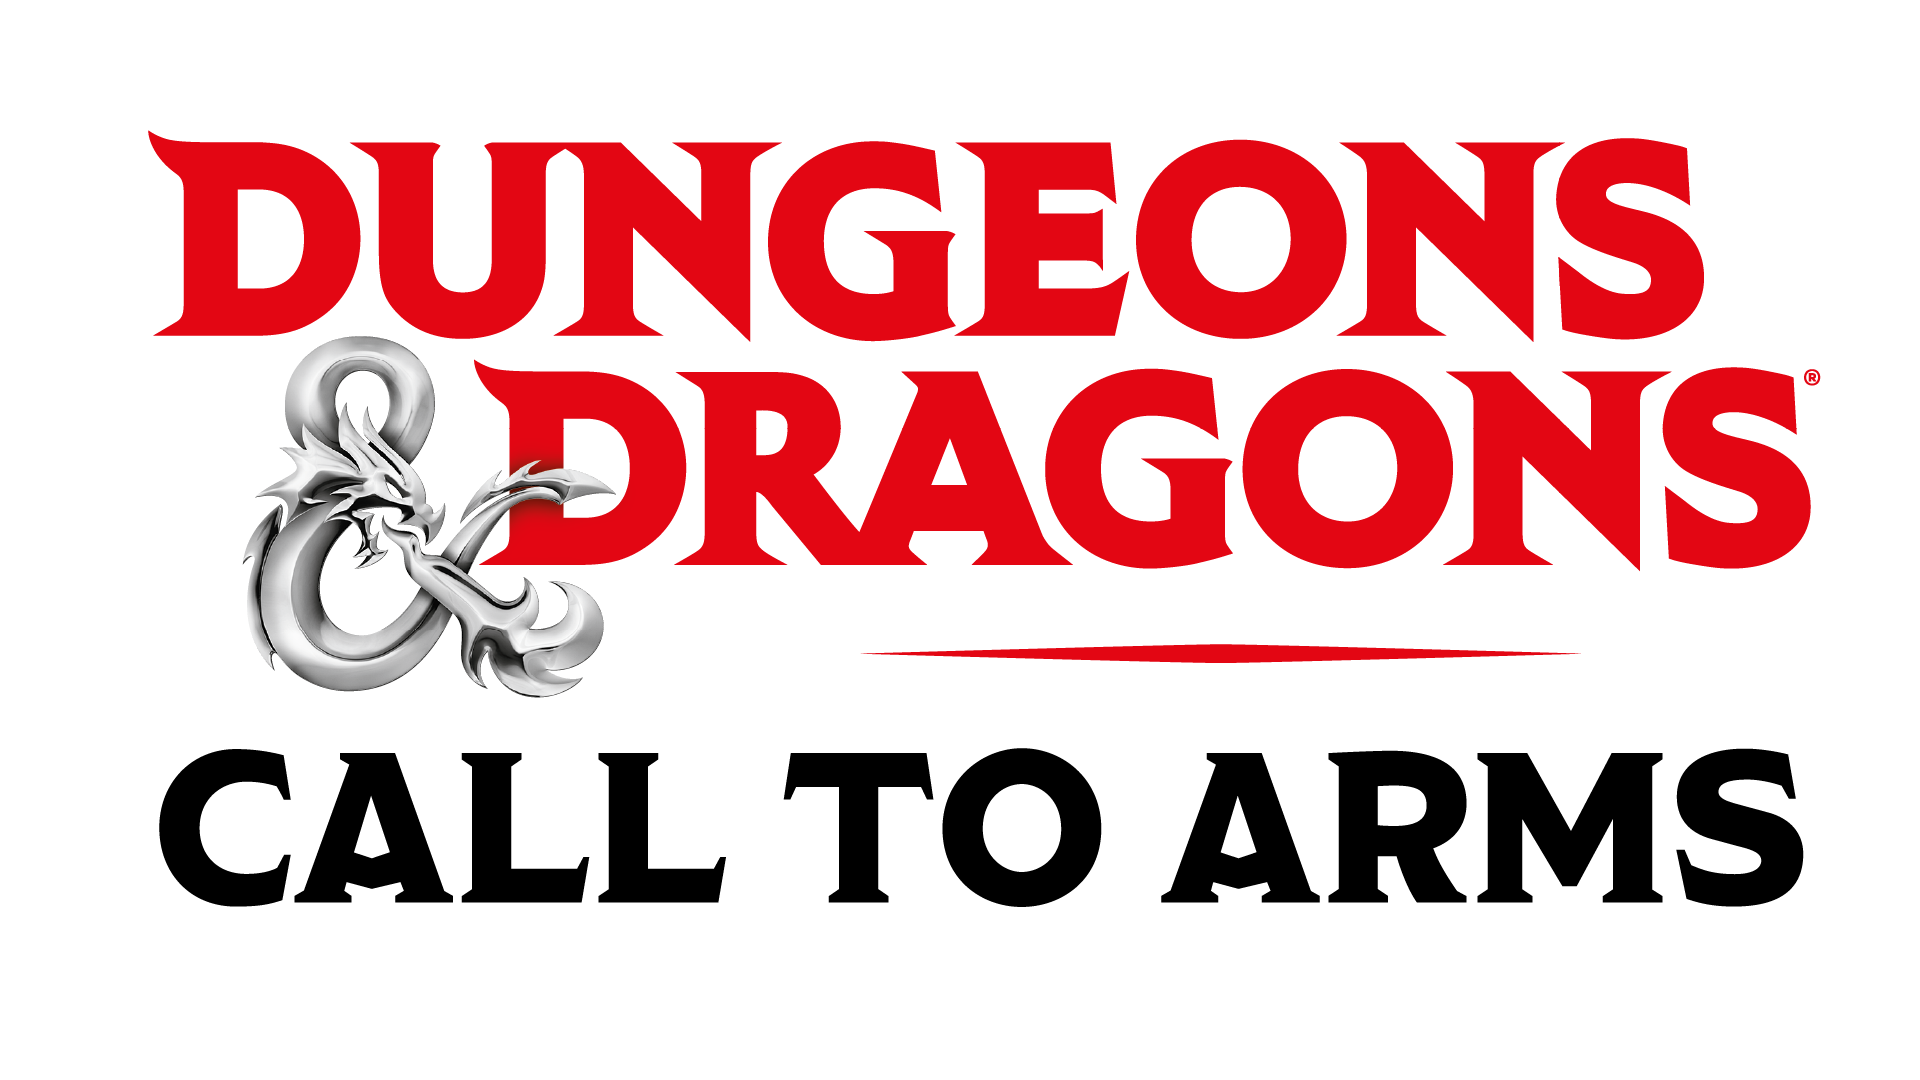 Dungeons & Dragons Call to Arms